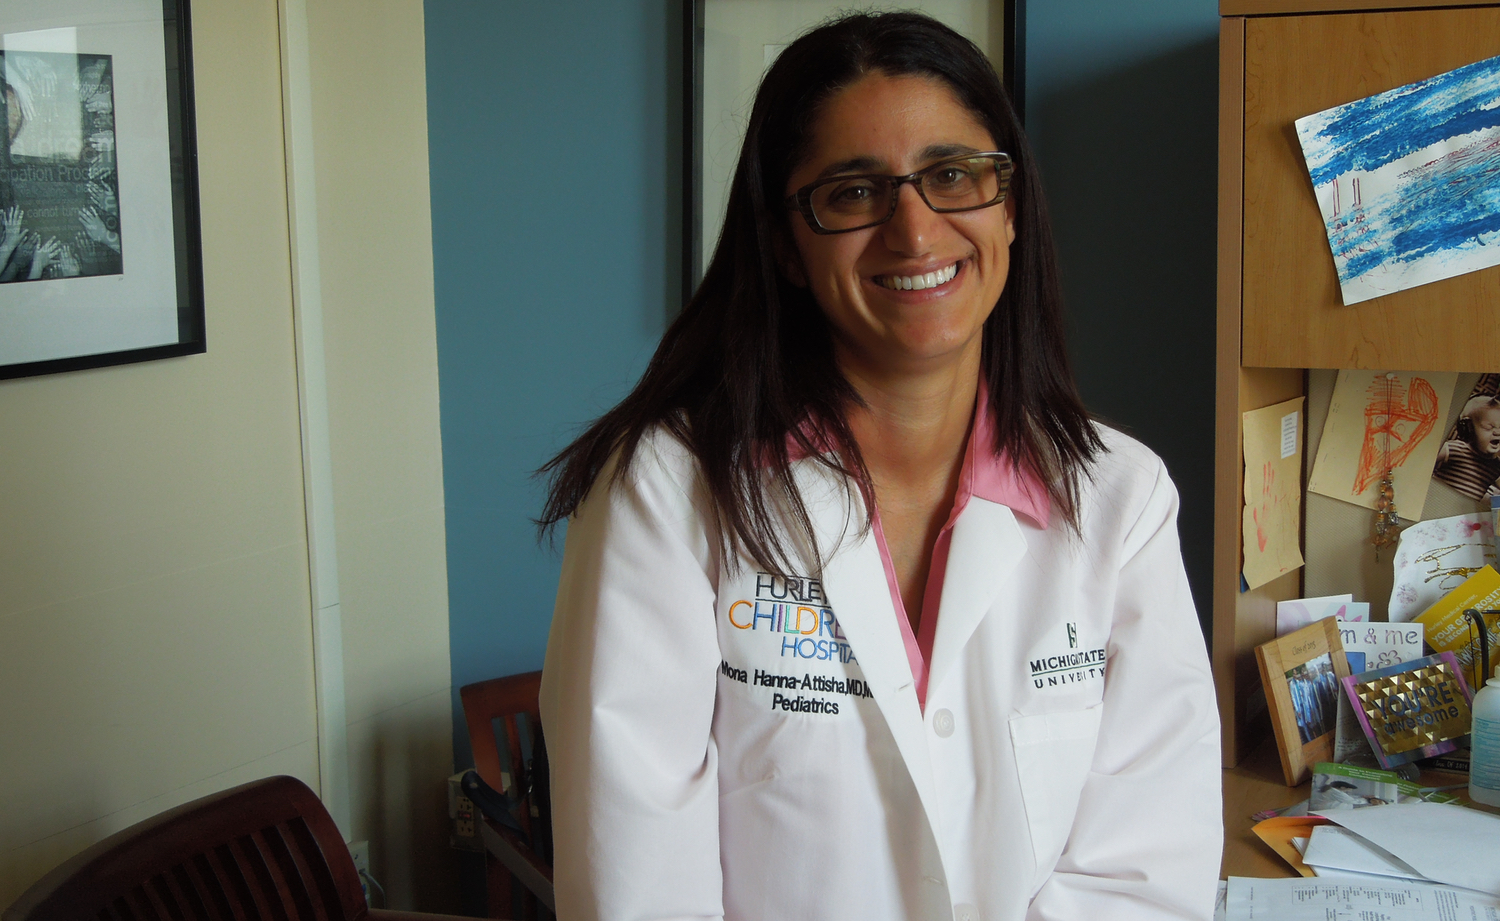 Dr. Mona Hanna-Attisha, the Flint pediatrician hailed as a hero in its water crisis, says she’s an optimist, but with nearly $600 million pledged or delivered to the city to mitigate its water crisis, the task is still thorny and the undone work enormous. “These kids did nothing wrong,” Hanna-Attisha said. “We owe it to them.” (Bridge photo by Ron French) 